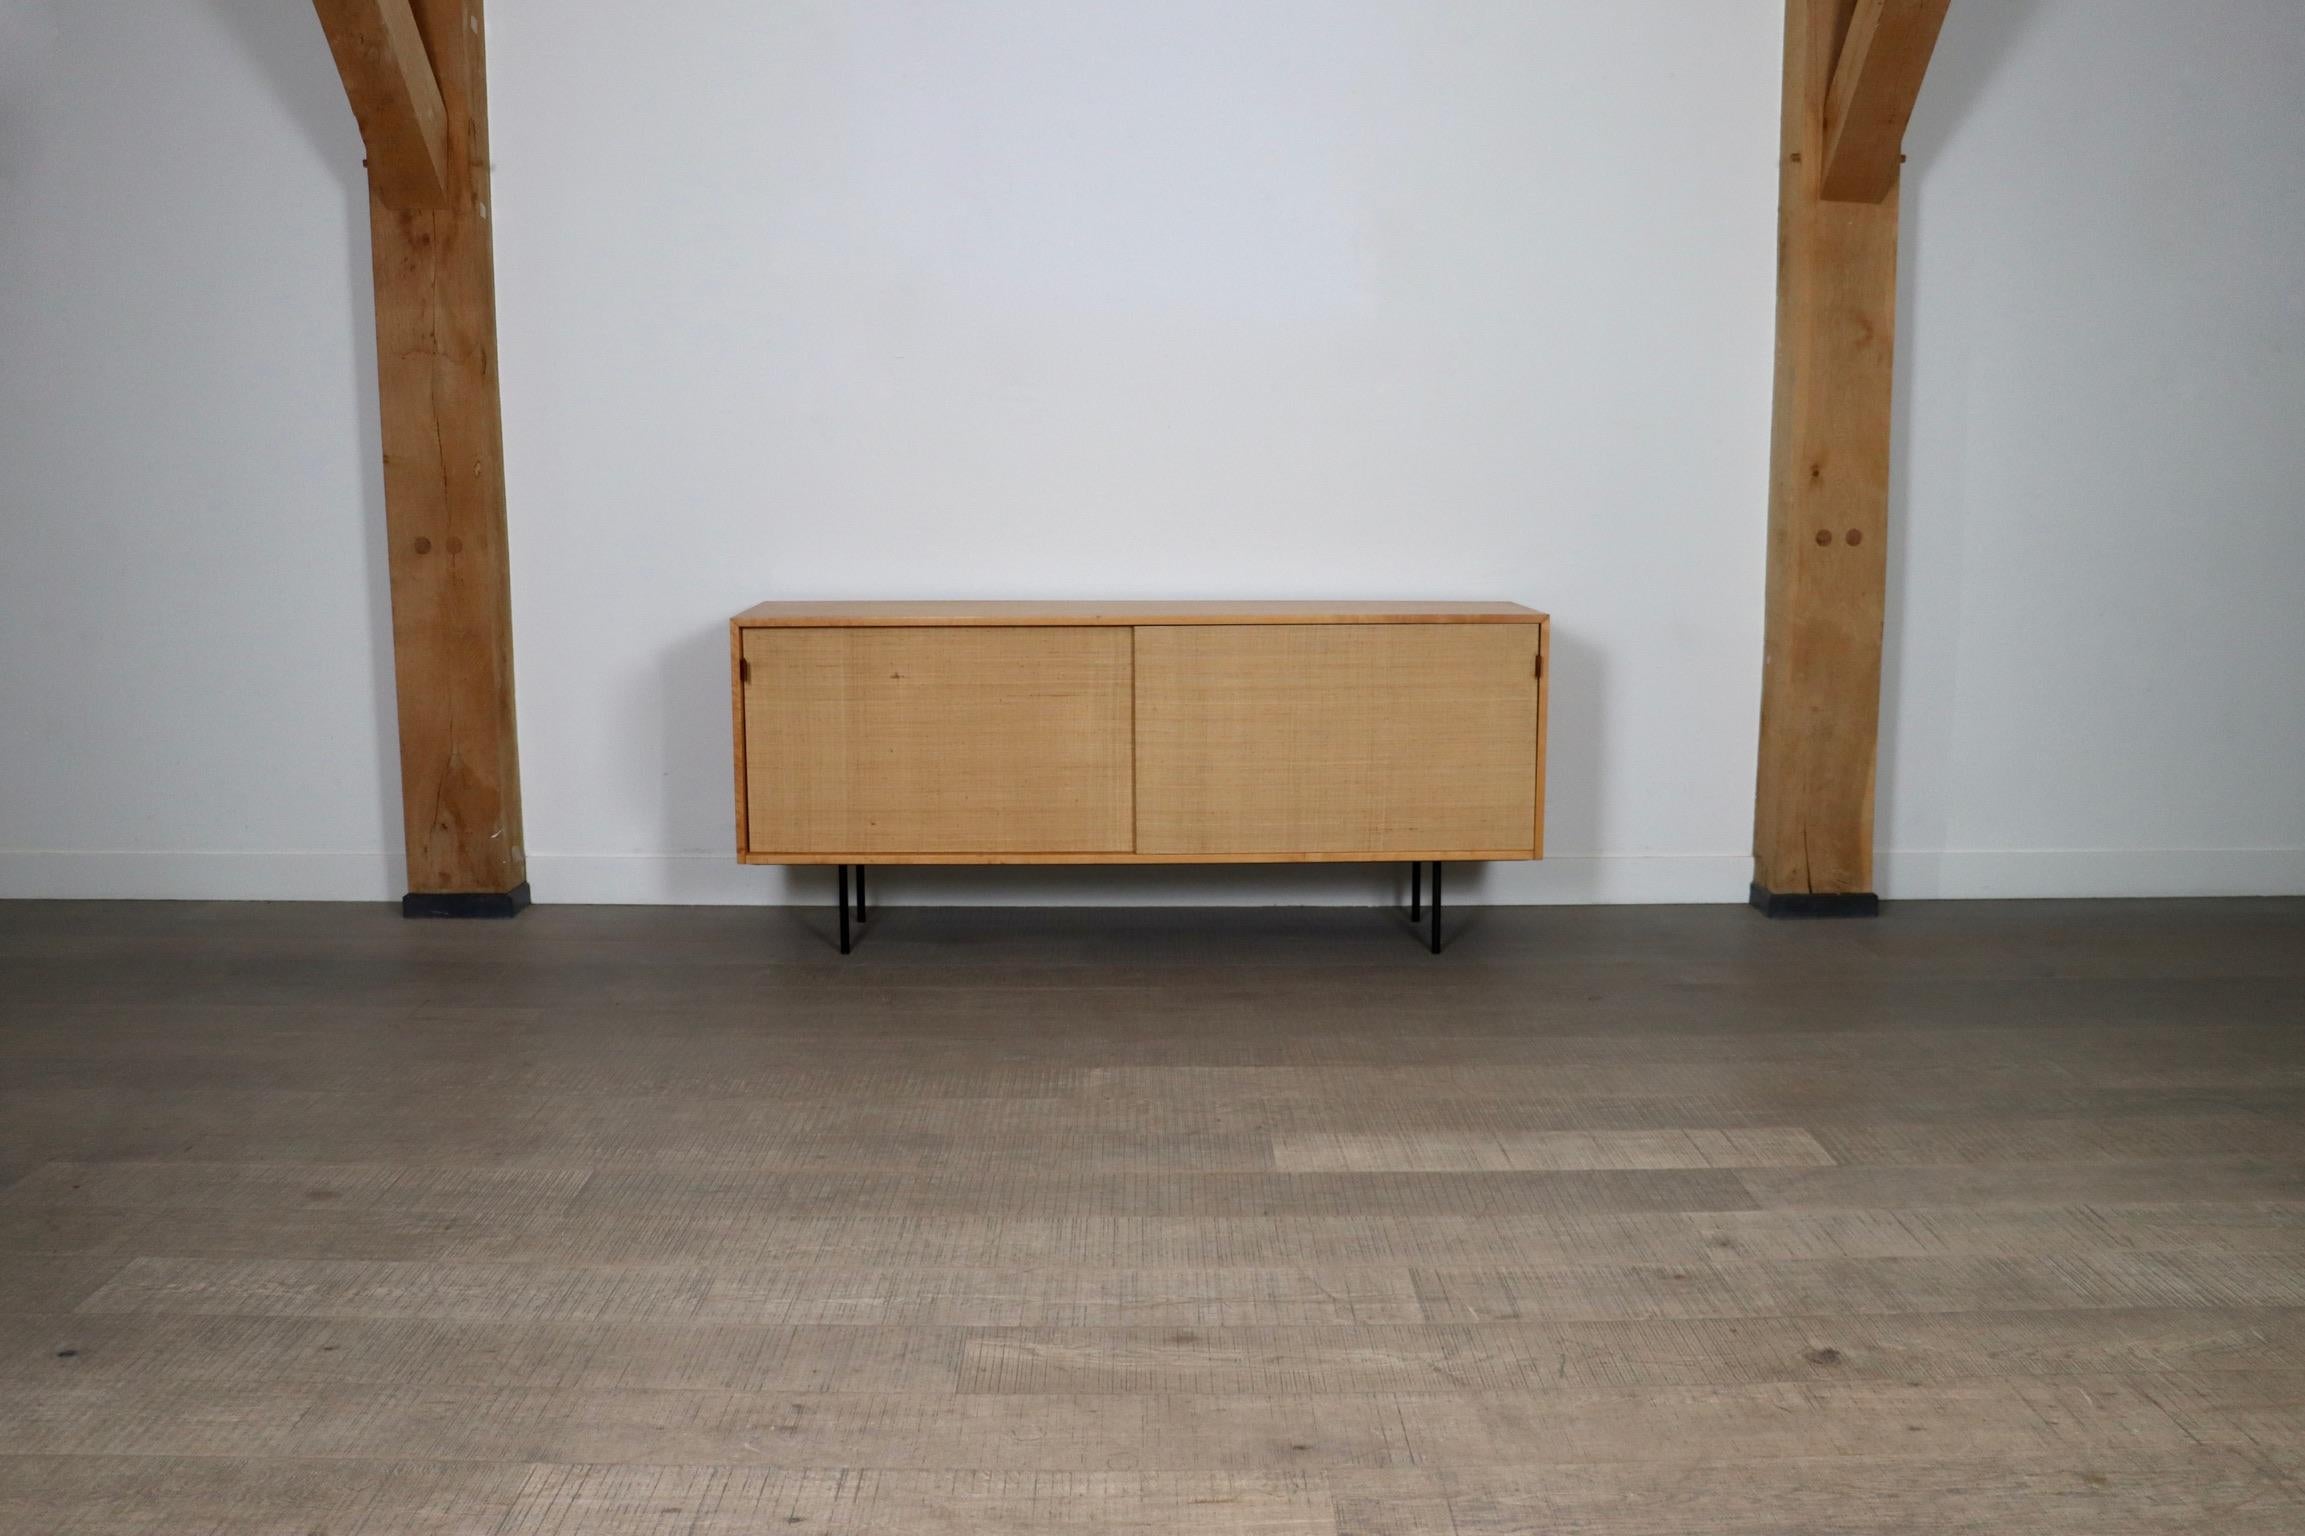 Fantastic Sideboard by Florence Knoll, model 116 in maple wood and original seagrass sliding doors for Knoll International, Stuttgart, 1950s

This breathtaking timeless design will instantly elevate any space. The stunning original seagrass sliding